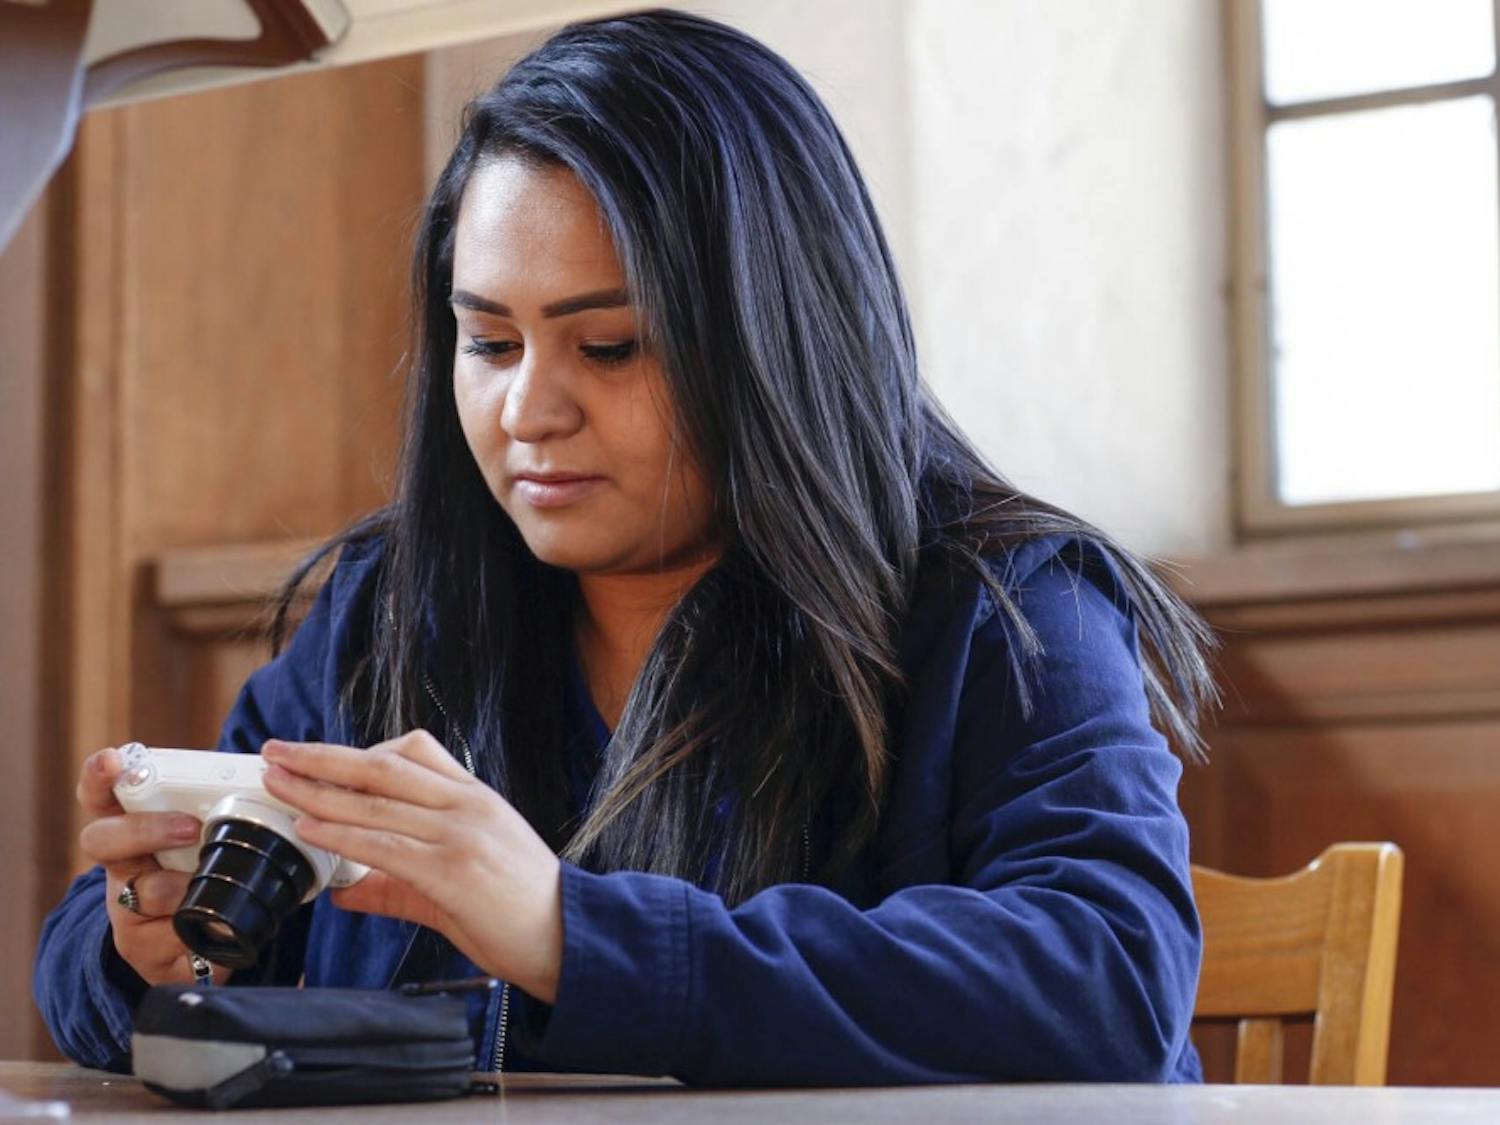 Vanessa Espinoza works on her camera at Zimmerman Library on Dec. 09, 2017. Vanessa is a mass communication and journalism major from El Paso, Texas.
